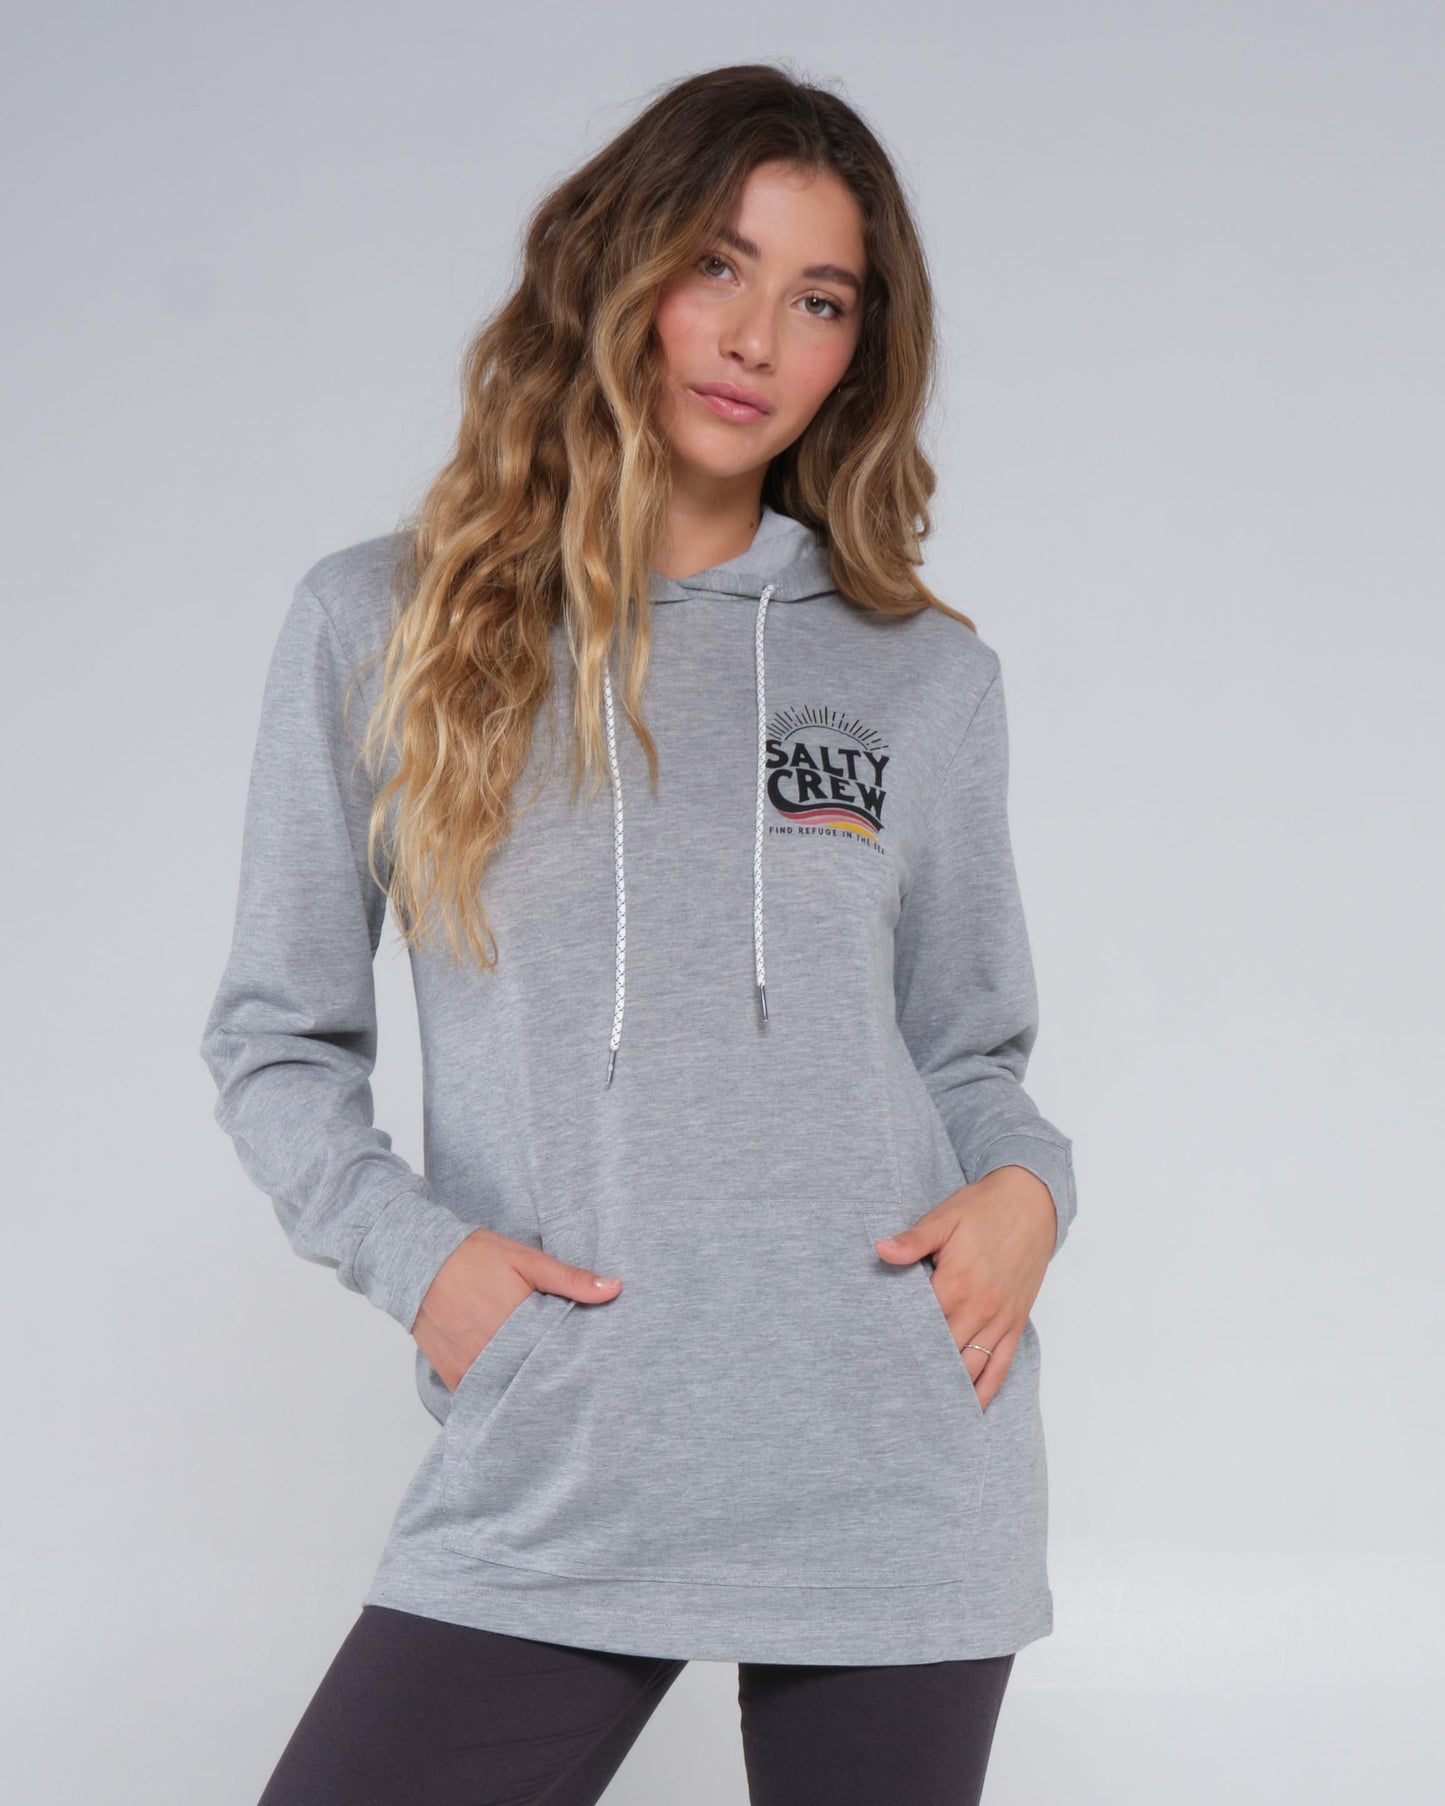 Salty crew SUN PROTECTION THE WAVE MID WEIGHT HOODY - Athletic Heather in Athletic Heather